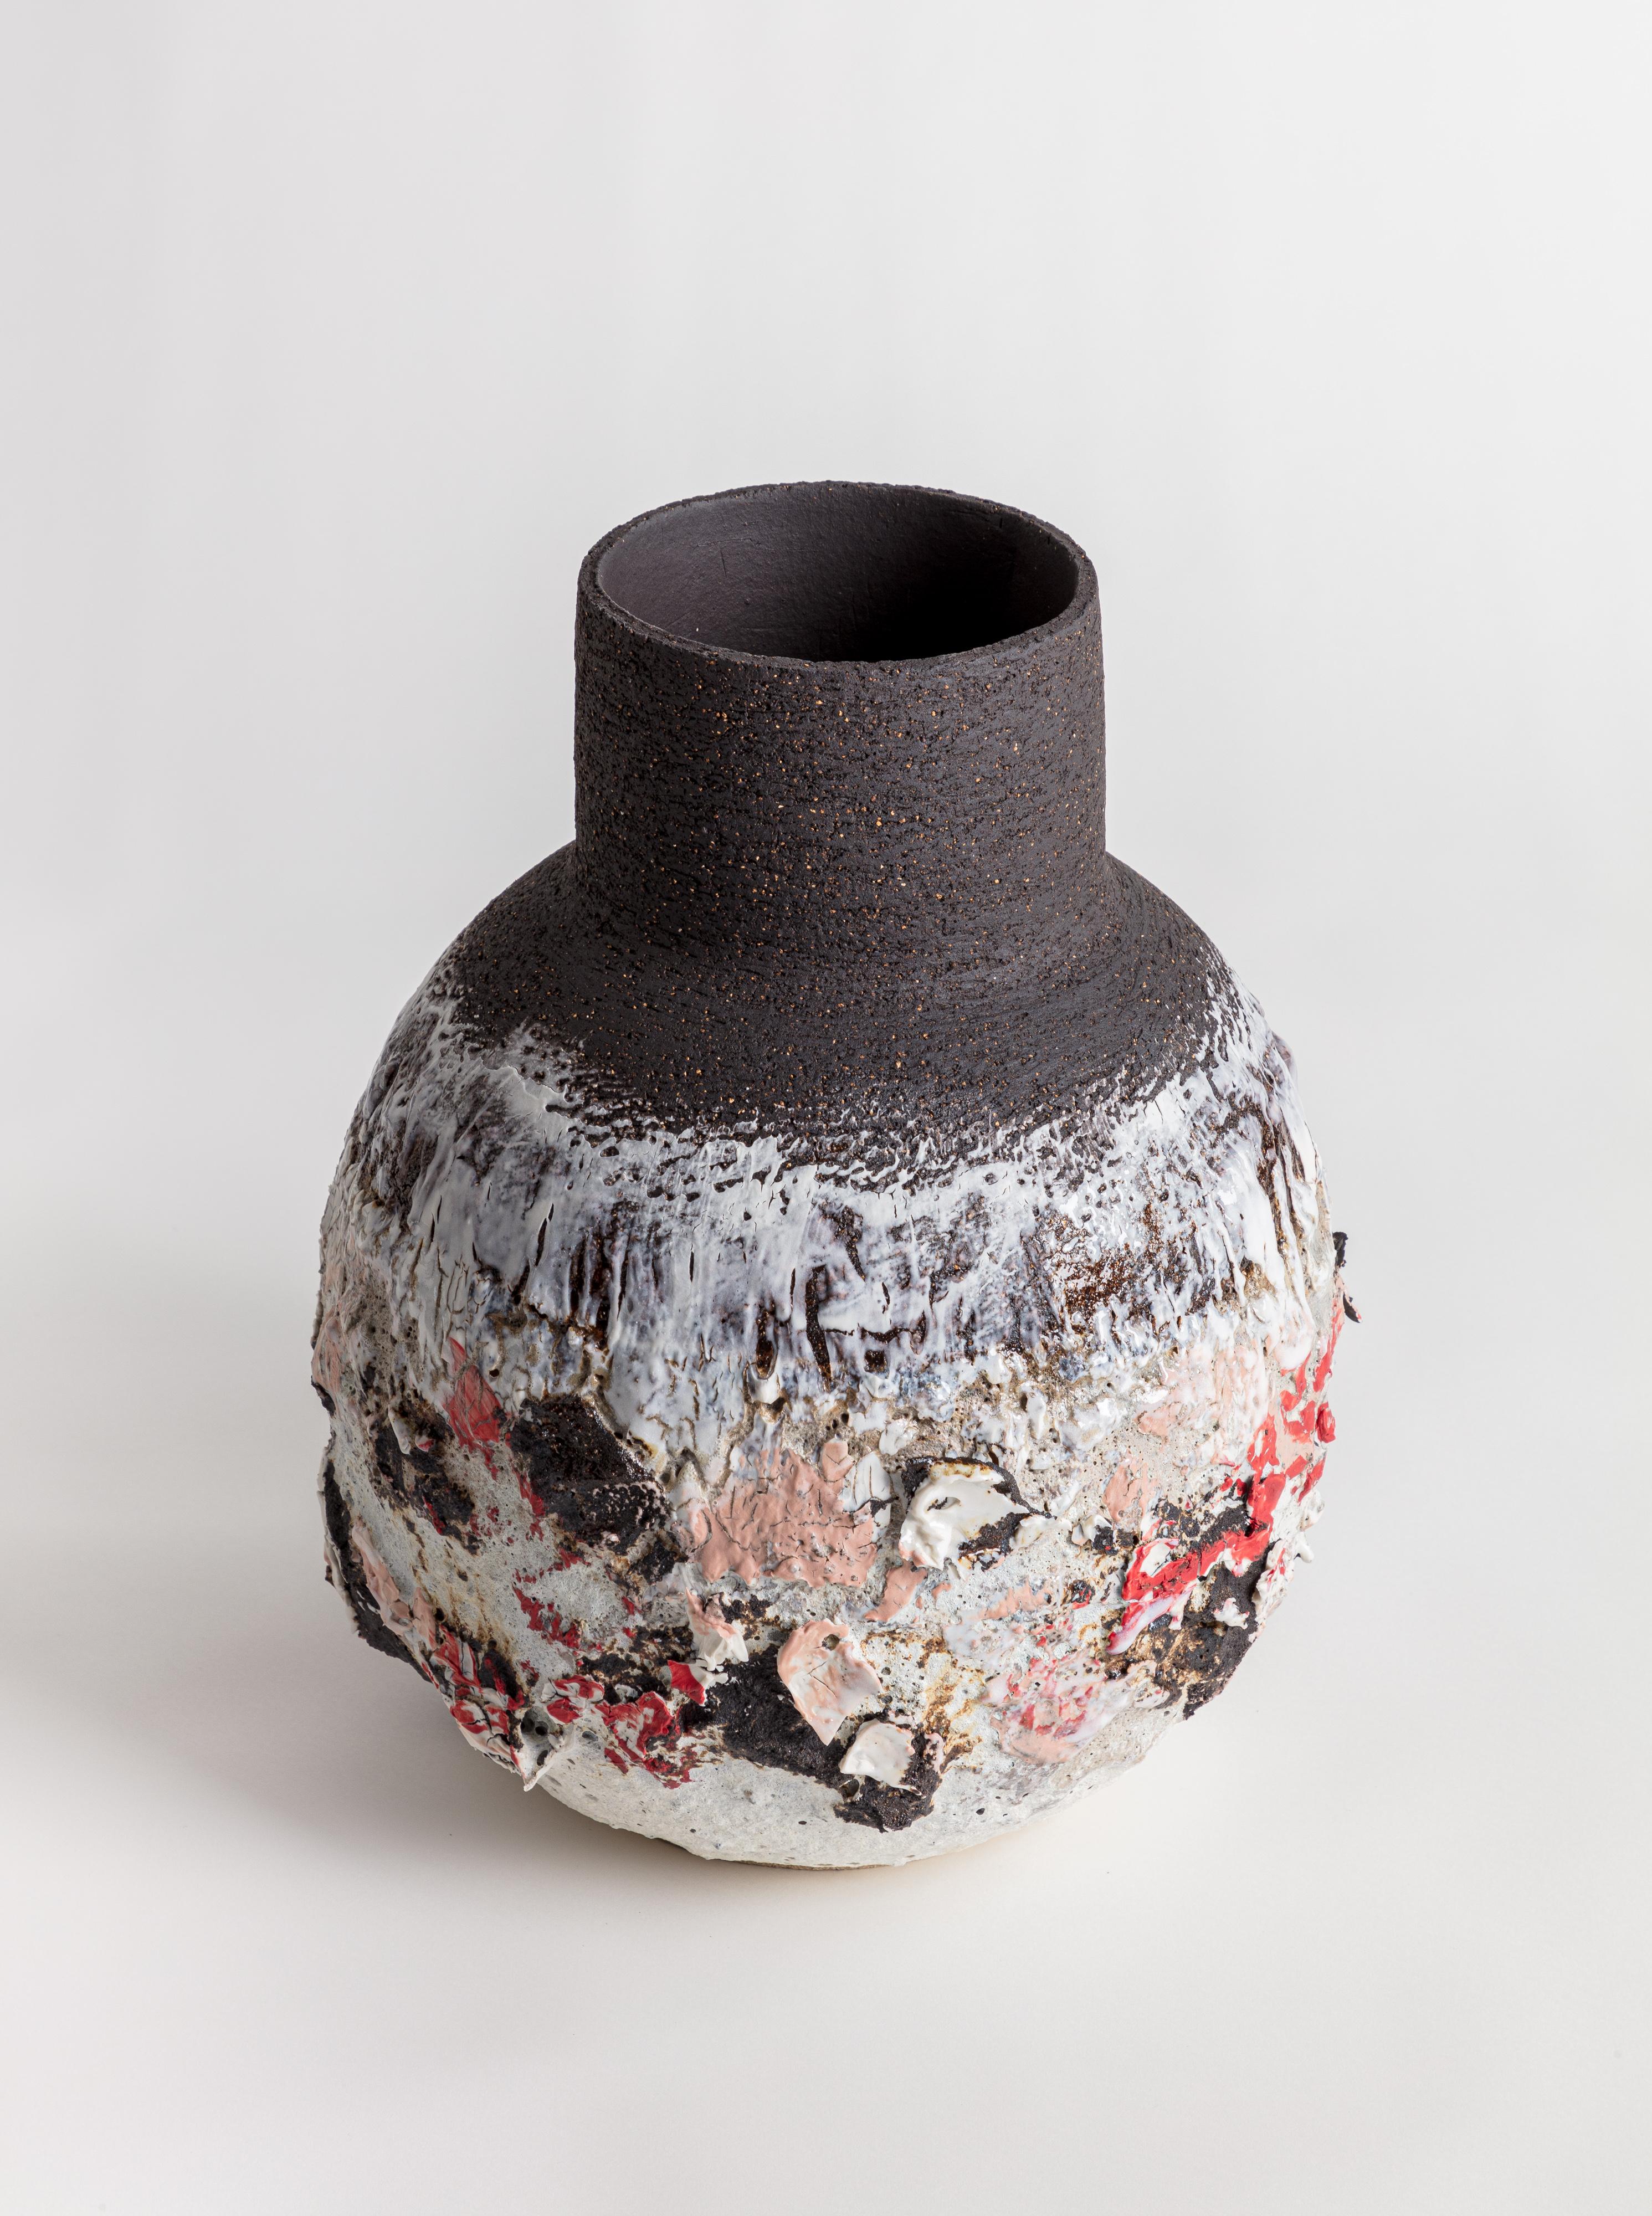 A large heavily textured volcanic vase with black, white and brown glaze and markings. Wide necked vessel with a bellied form. Made from black textured stoneware clay and porcelain.

Inspiration for the piece comes from the clay itself and the